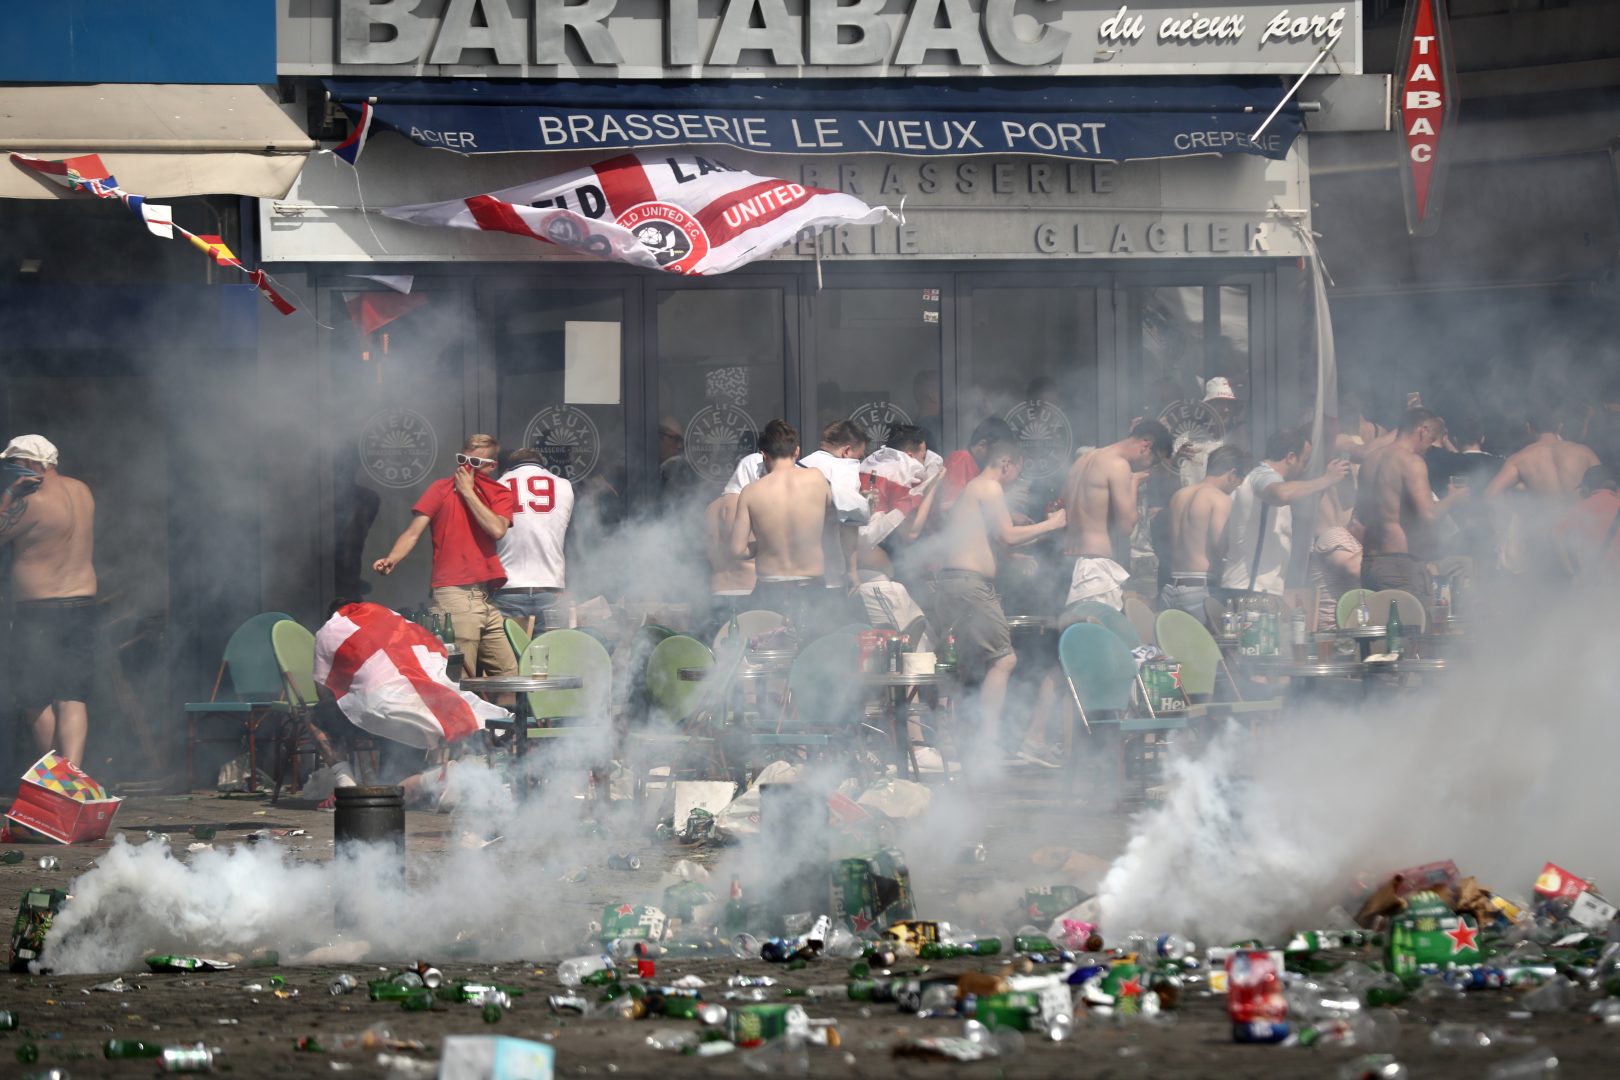 MARSEILLE, FRANCE - JUNE 11:  England fans react after police sprayed tear gas during clashes ahead of the game against Russia later today on June 11, 2016 in Marseille, France.  Football fans from around Europe have descended on France for the UEFA Euro 2016 football tournament.  (Photo by Carl Court/Getty Images)